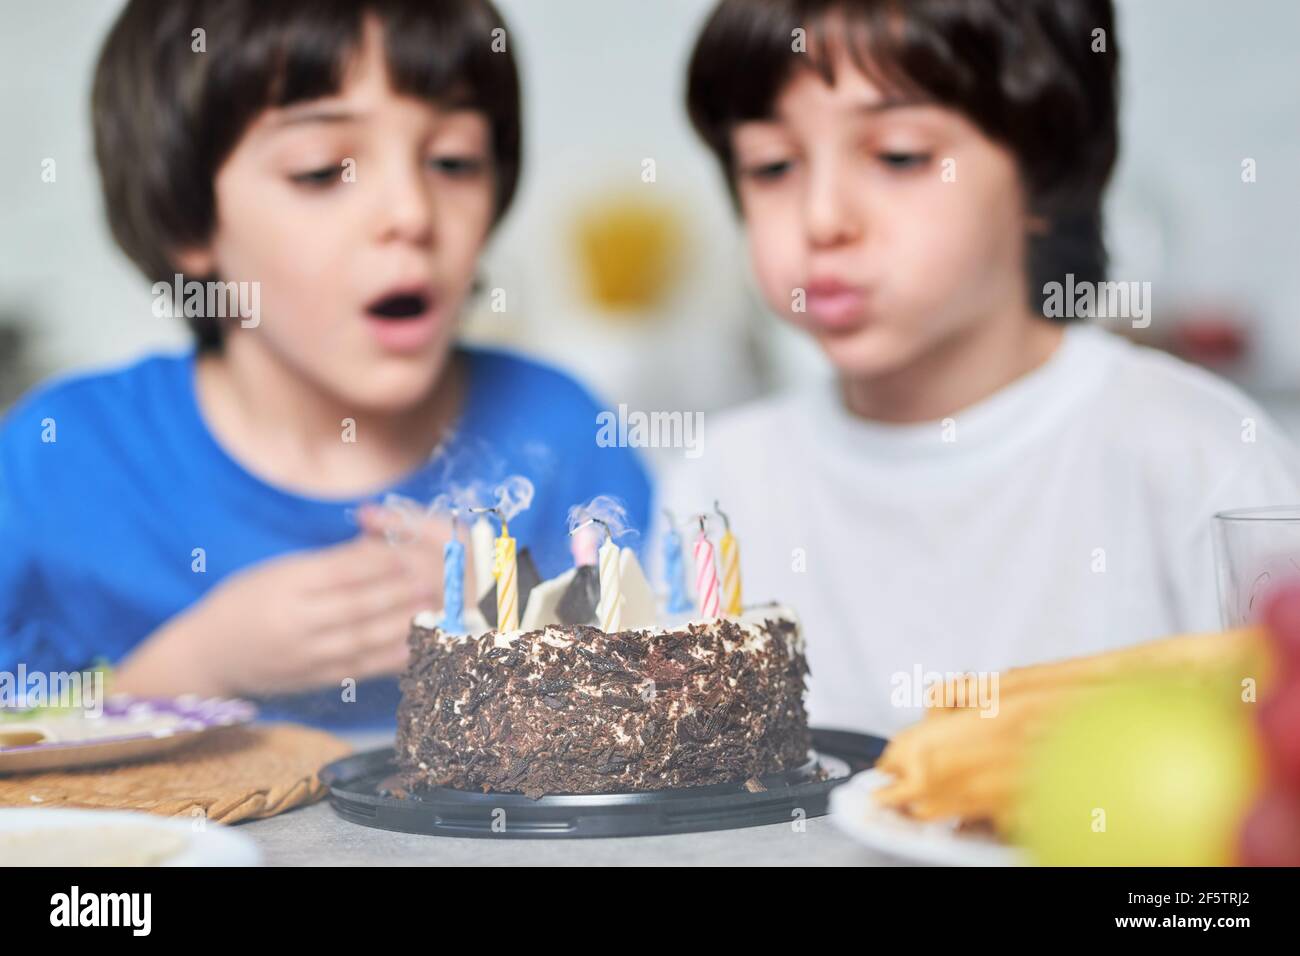 Birthday boys. Two little latin boys blowing candles on a birthday cake while celebrating birthday together with family at home Stock Photo